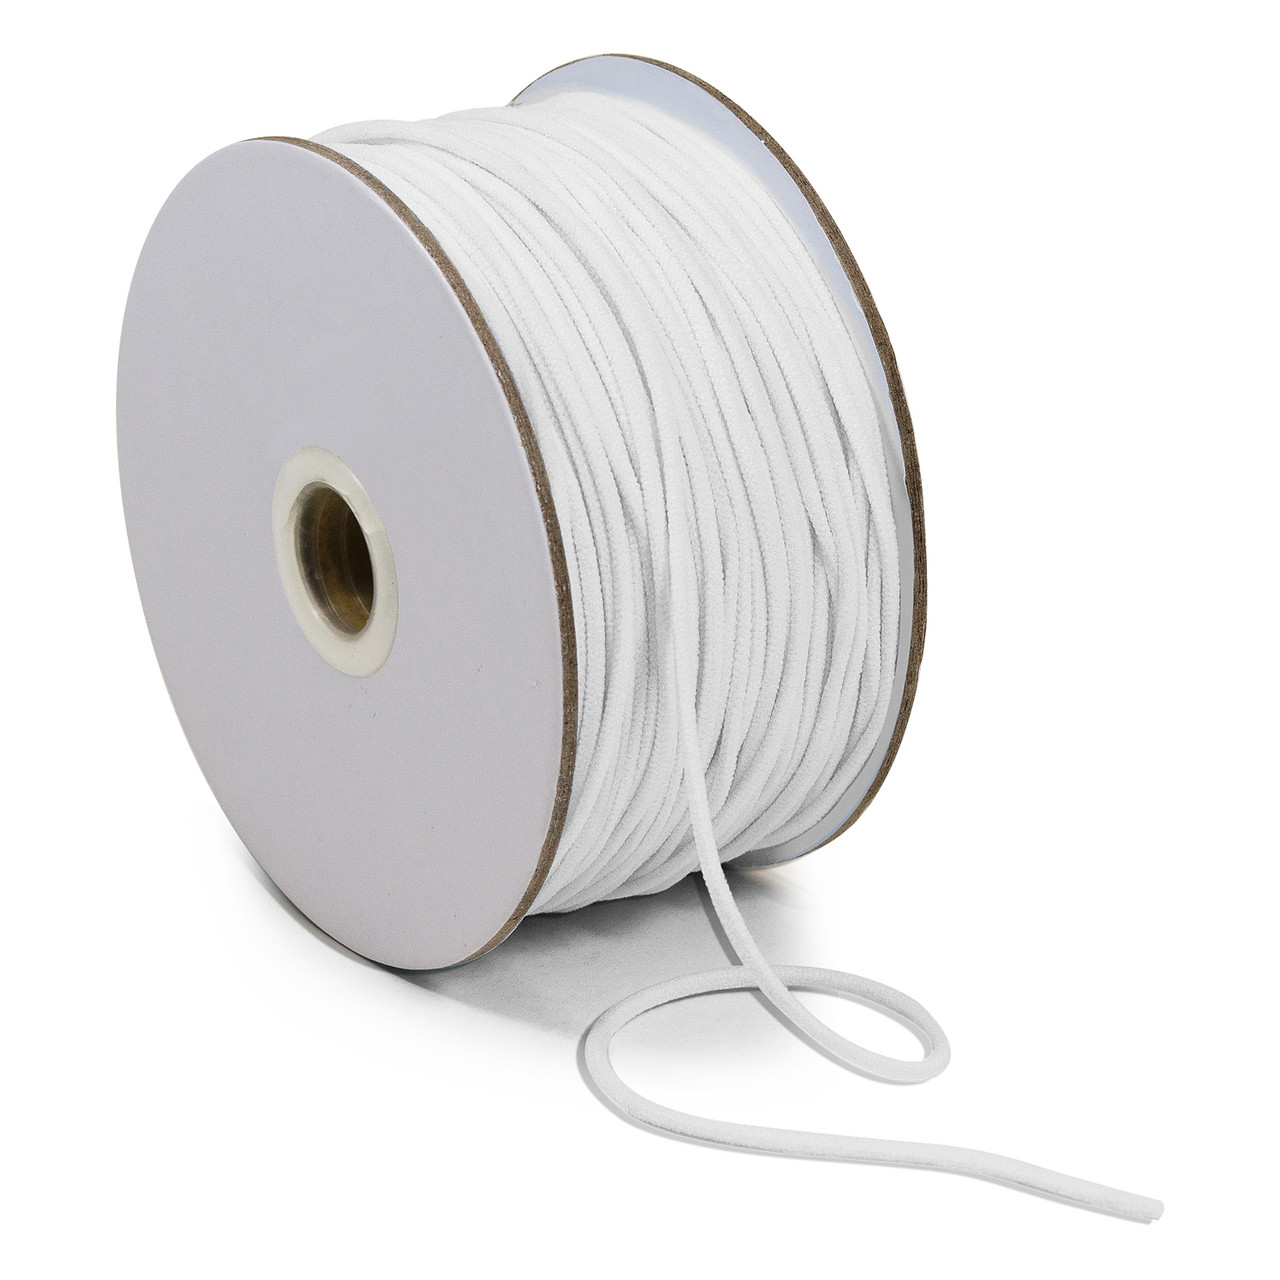 Trims by The Yard 1/8 Soft Knit Elastic Band, Premium Material, Durable Knitted Elastic Cord for Sewing, Easy to Use, Versatile Sewing Supplies